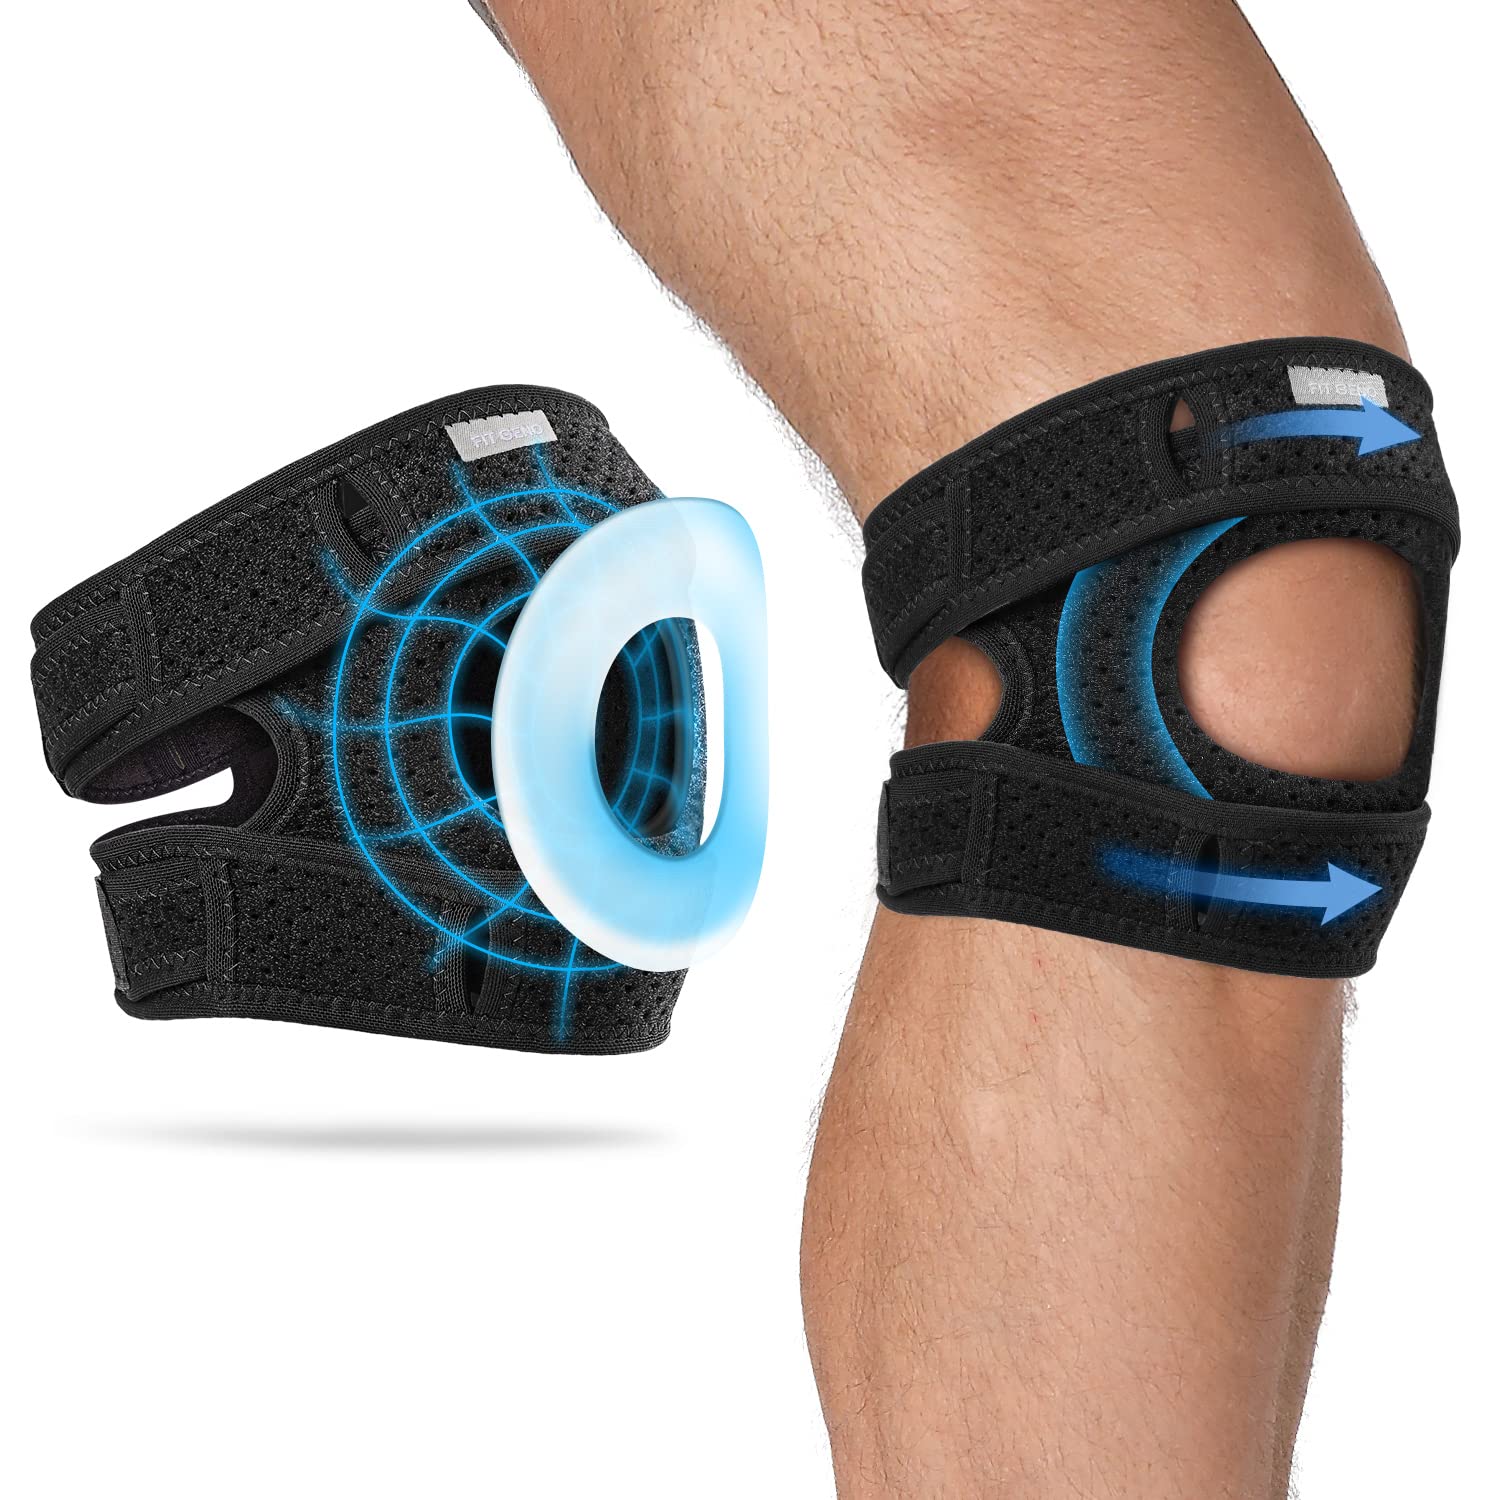 Buy Boldfit Patella Knee Support - Knee Strap Brace Support for